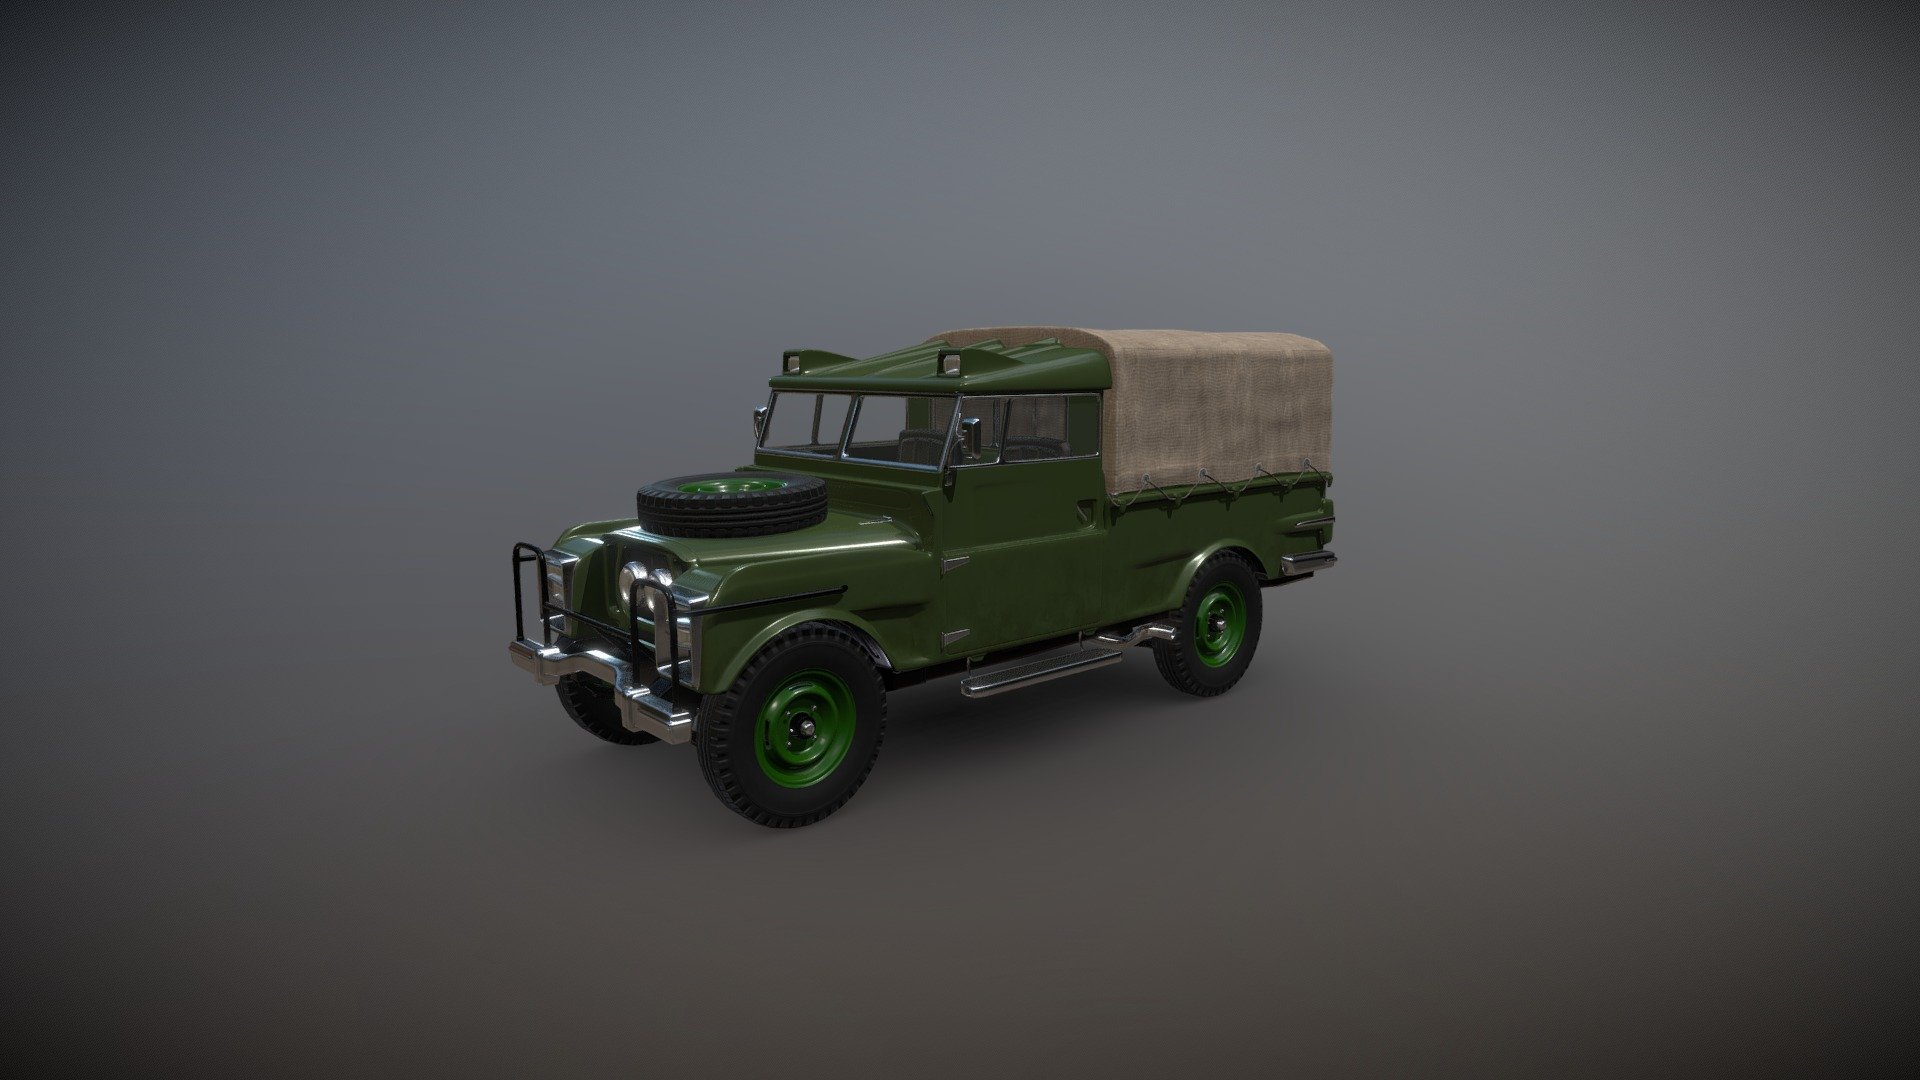 The Loyalist is of Atom-Punk inspiration recreating the astute Military Jeeps used in the English Army.

This model has been created using a high-low poly construction method &amp; comes with a PBR Metallic / Roughness texture set. 

(The Engine in this model is for showcase purposes only and not intendid for game usage as it is 32k tri's on its own)

Originally created for modding purposes.

See more of my artwork on my ArtStation:

https://www.artstation.com/edgeuk90

(custom colors can be made on request)

Notice: Incorrect download / ripping of this content will result in a DMCA being filed against you 3d model